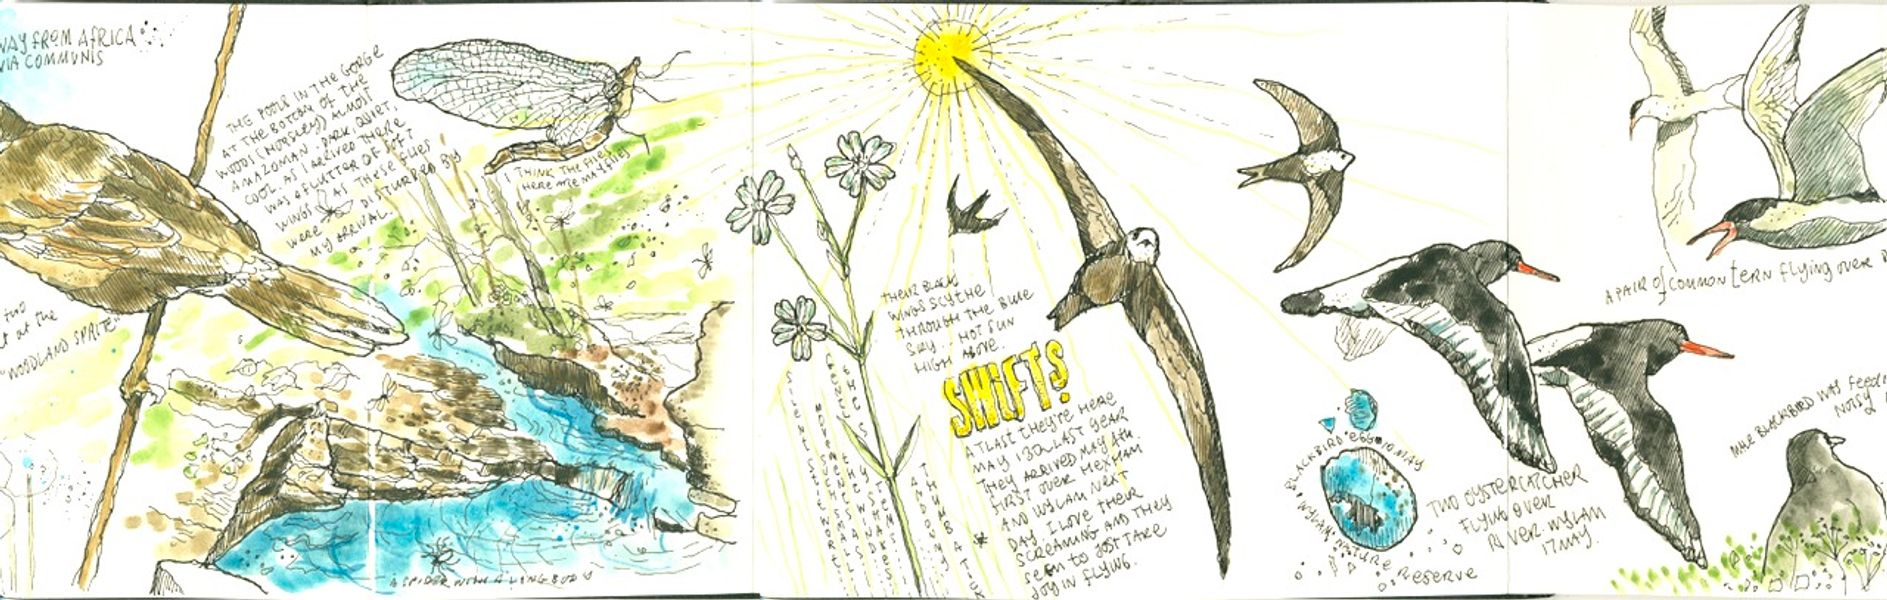 Shortcut to Nature Journalling' with Steve Pardue, a 'Quirky Workshop' in Greystoke, Cumbria and Lake District 